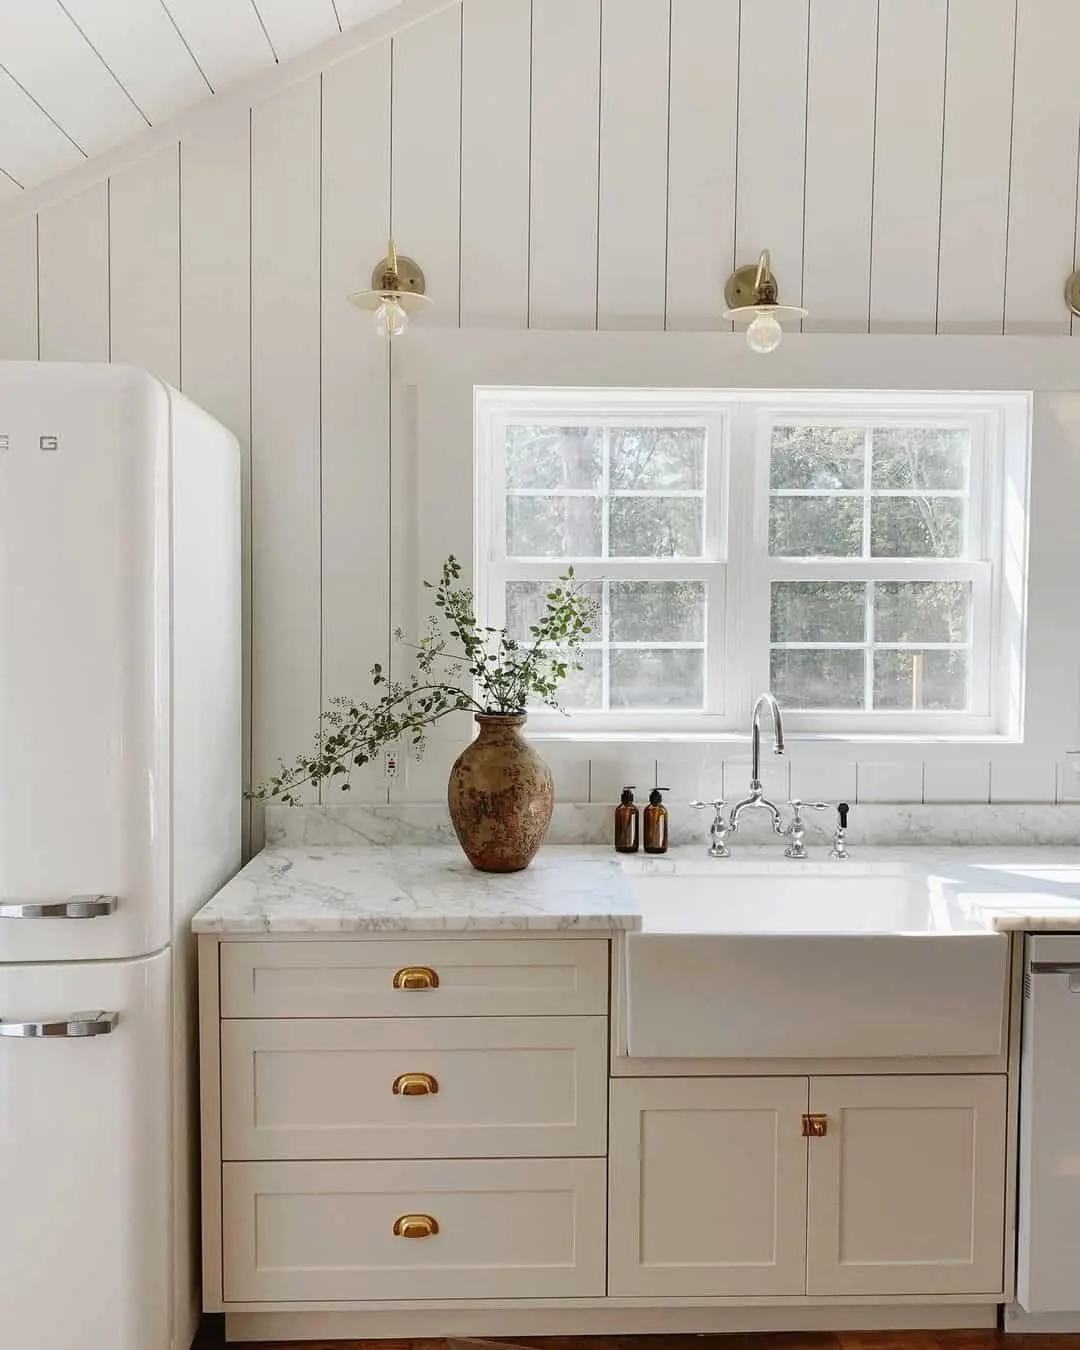 Beige Cabinets + Brass Hardware Bringing Charm To A Traditional Kitchen